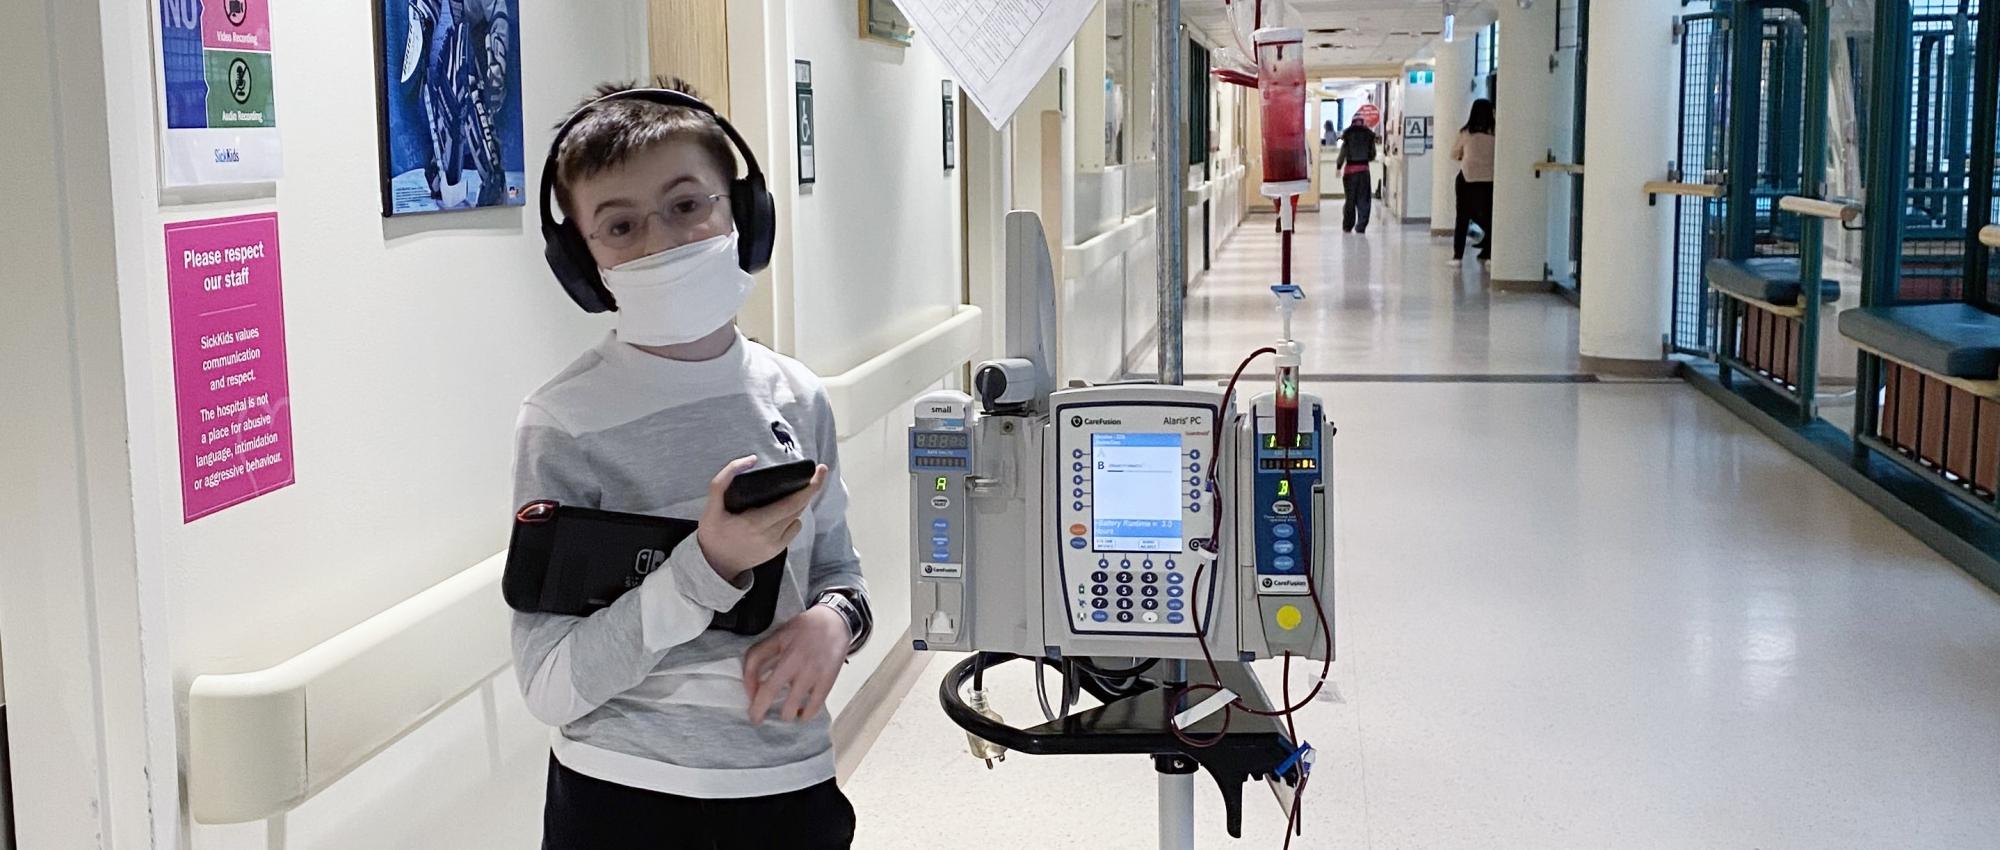 Boy with headphones and mask in hospital hallway getting blood transfusion